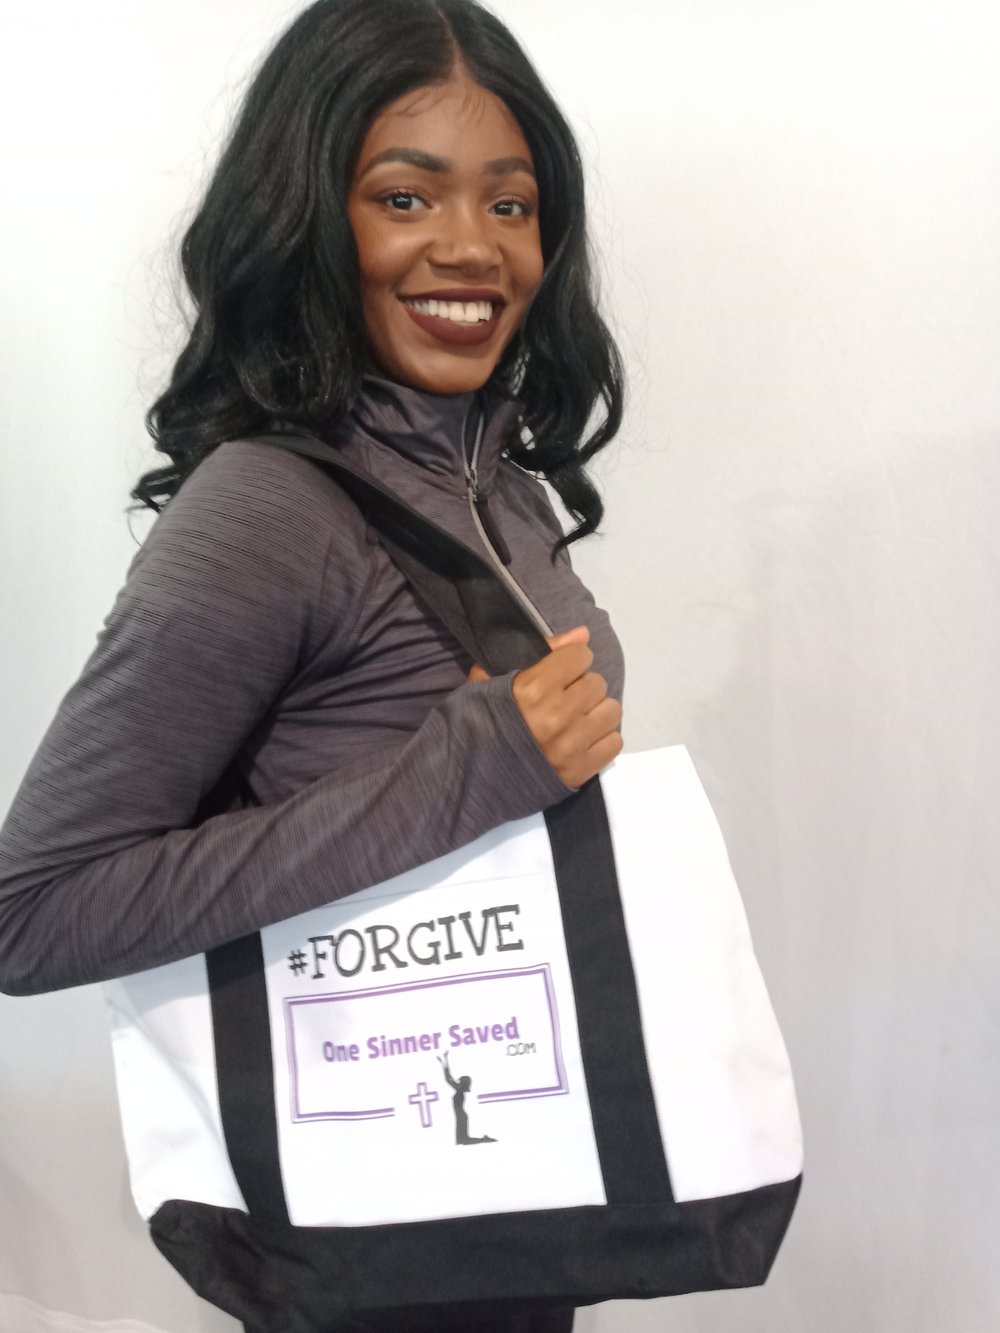 OneSinnerSaved.com #FORGIVE tote bag modeled by Brittney Smith of Kentucky.